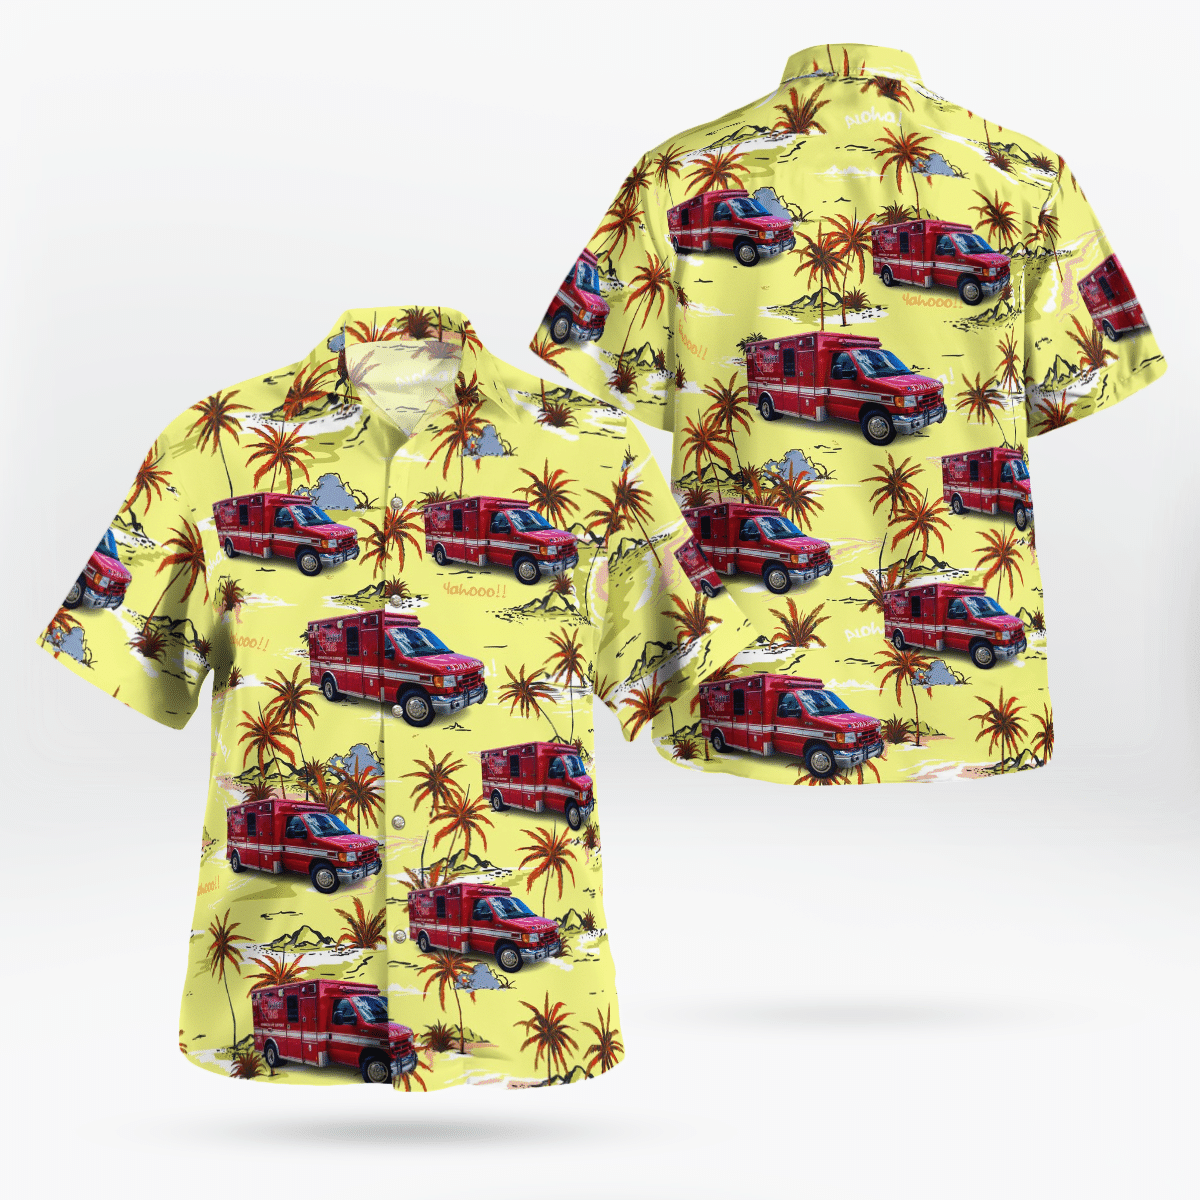 Shop now to find the perfect Hawaii Shirt for your hobby 12